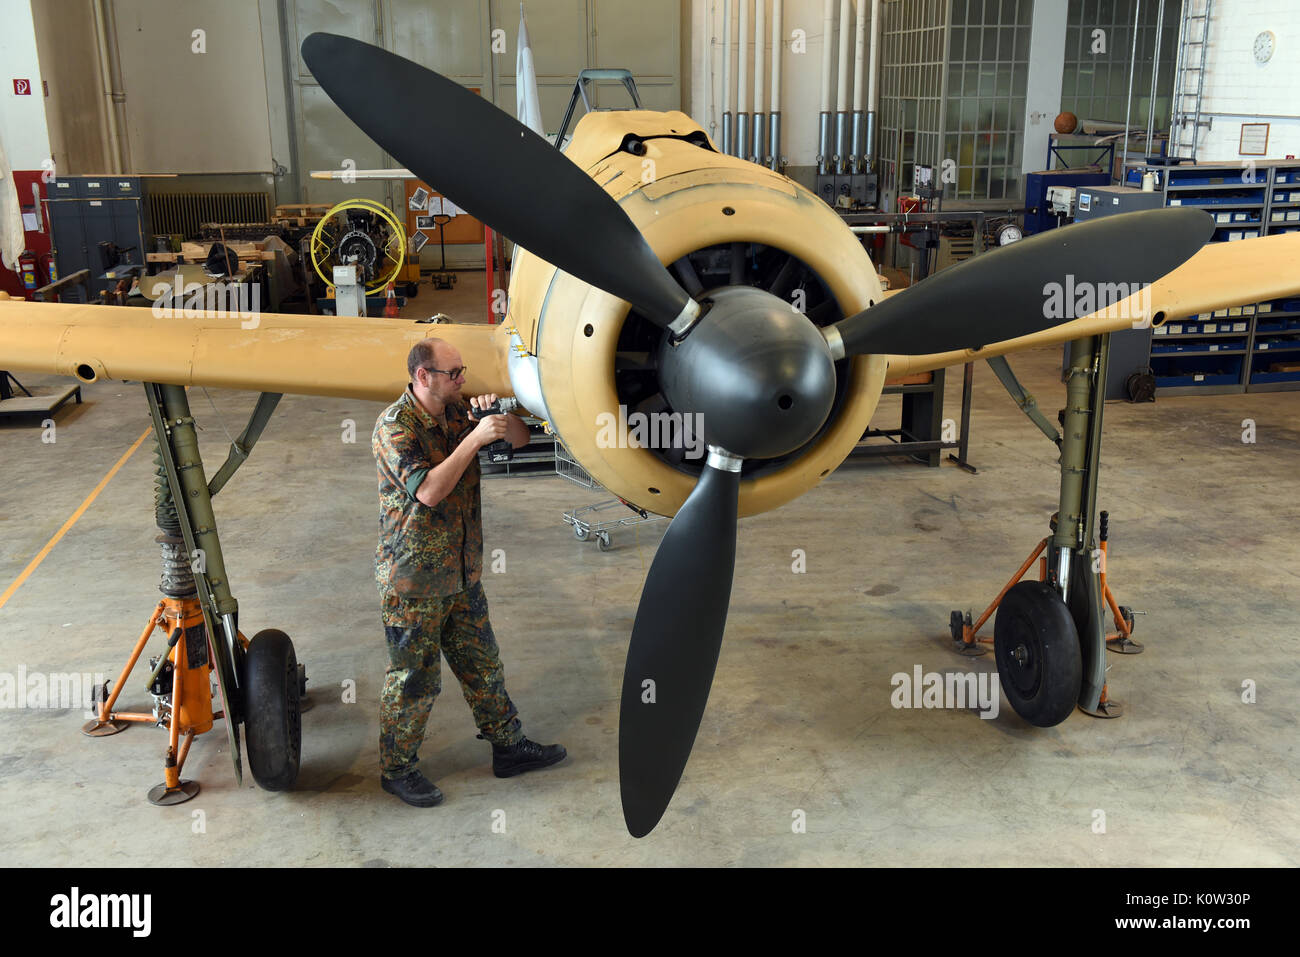 A Focke-Wulf Fw 190 A-8/R-2 is being restored in the restoration hangar of the Berlin-Gatow airfield branch of the Bundeswehr Museum of Military History in Berlin, Germany, 18 August 2017. The plan will be shown in the new exhibition in Hangar 3. Photo: Maurizio Gambarini/dpa Stock Photo